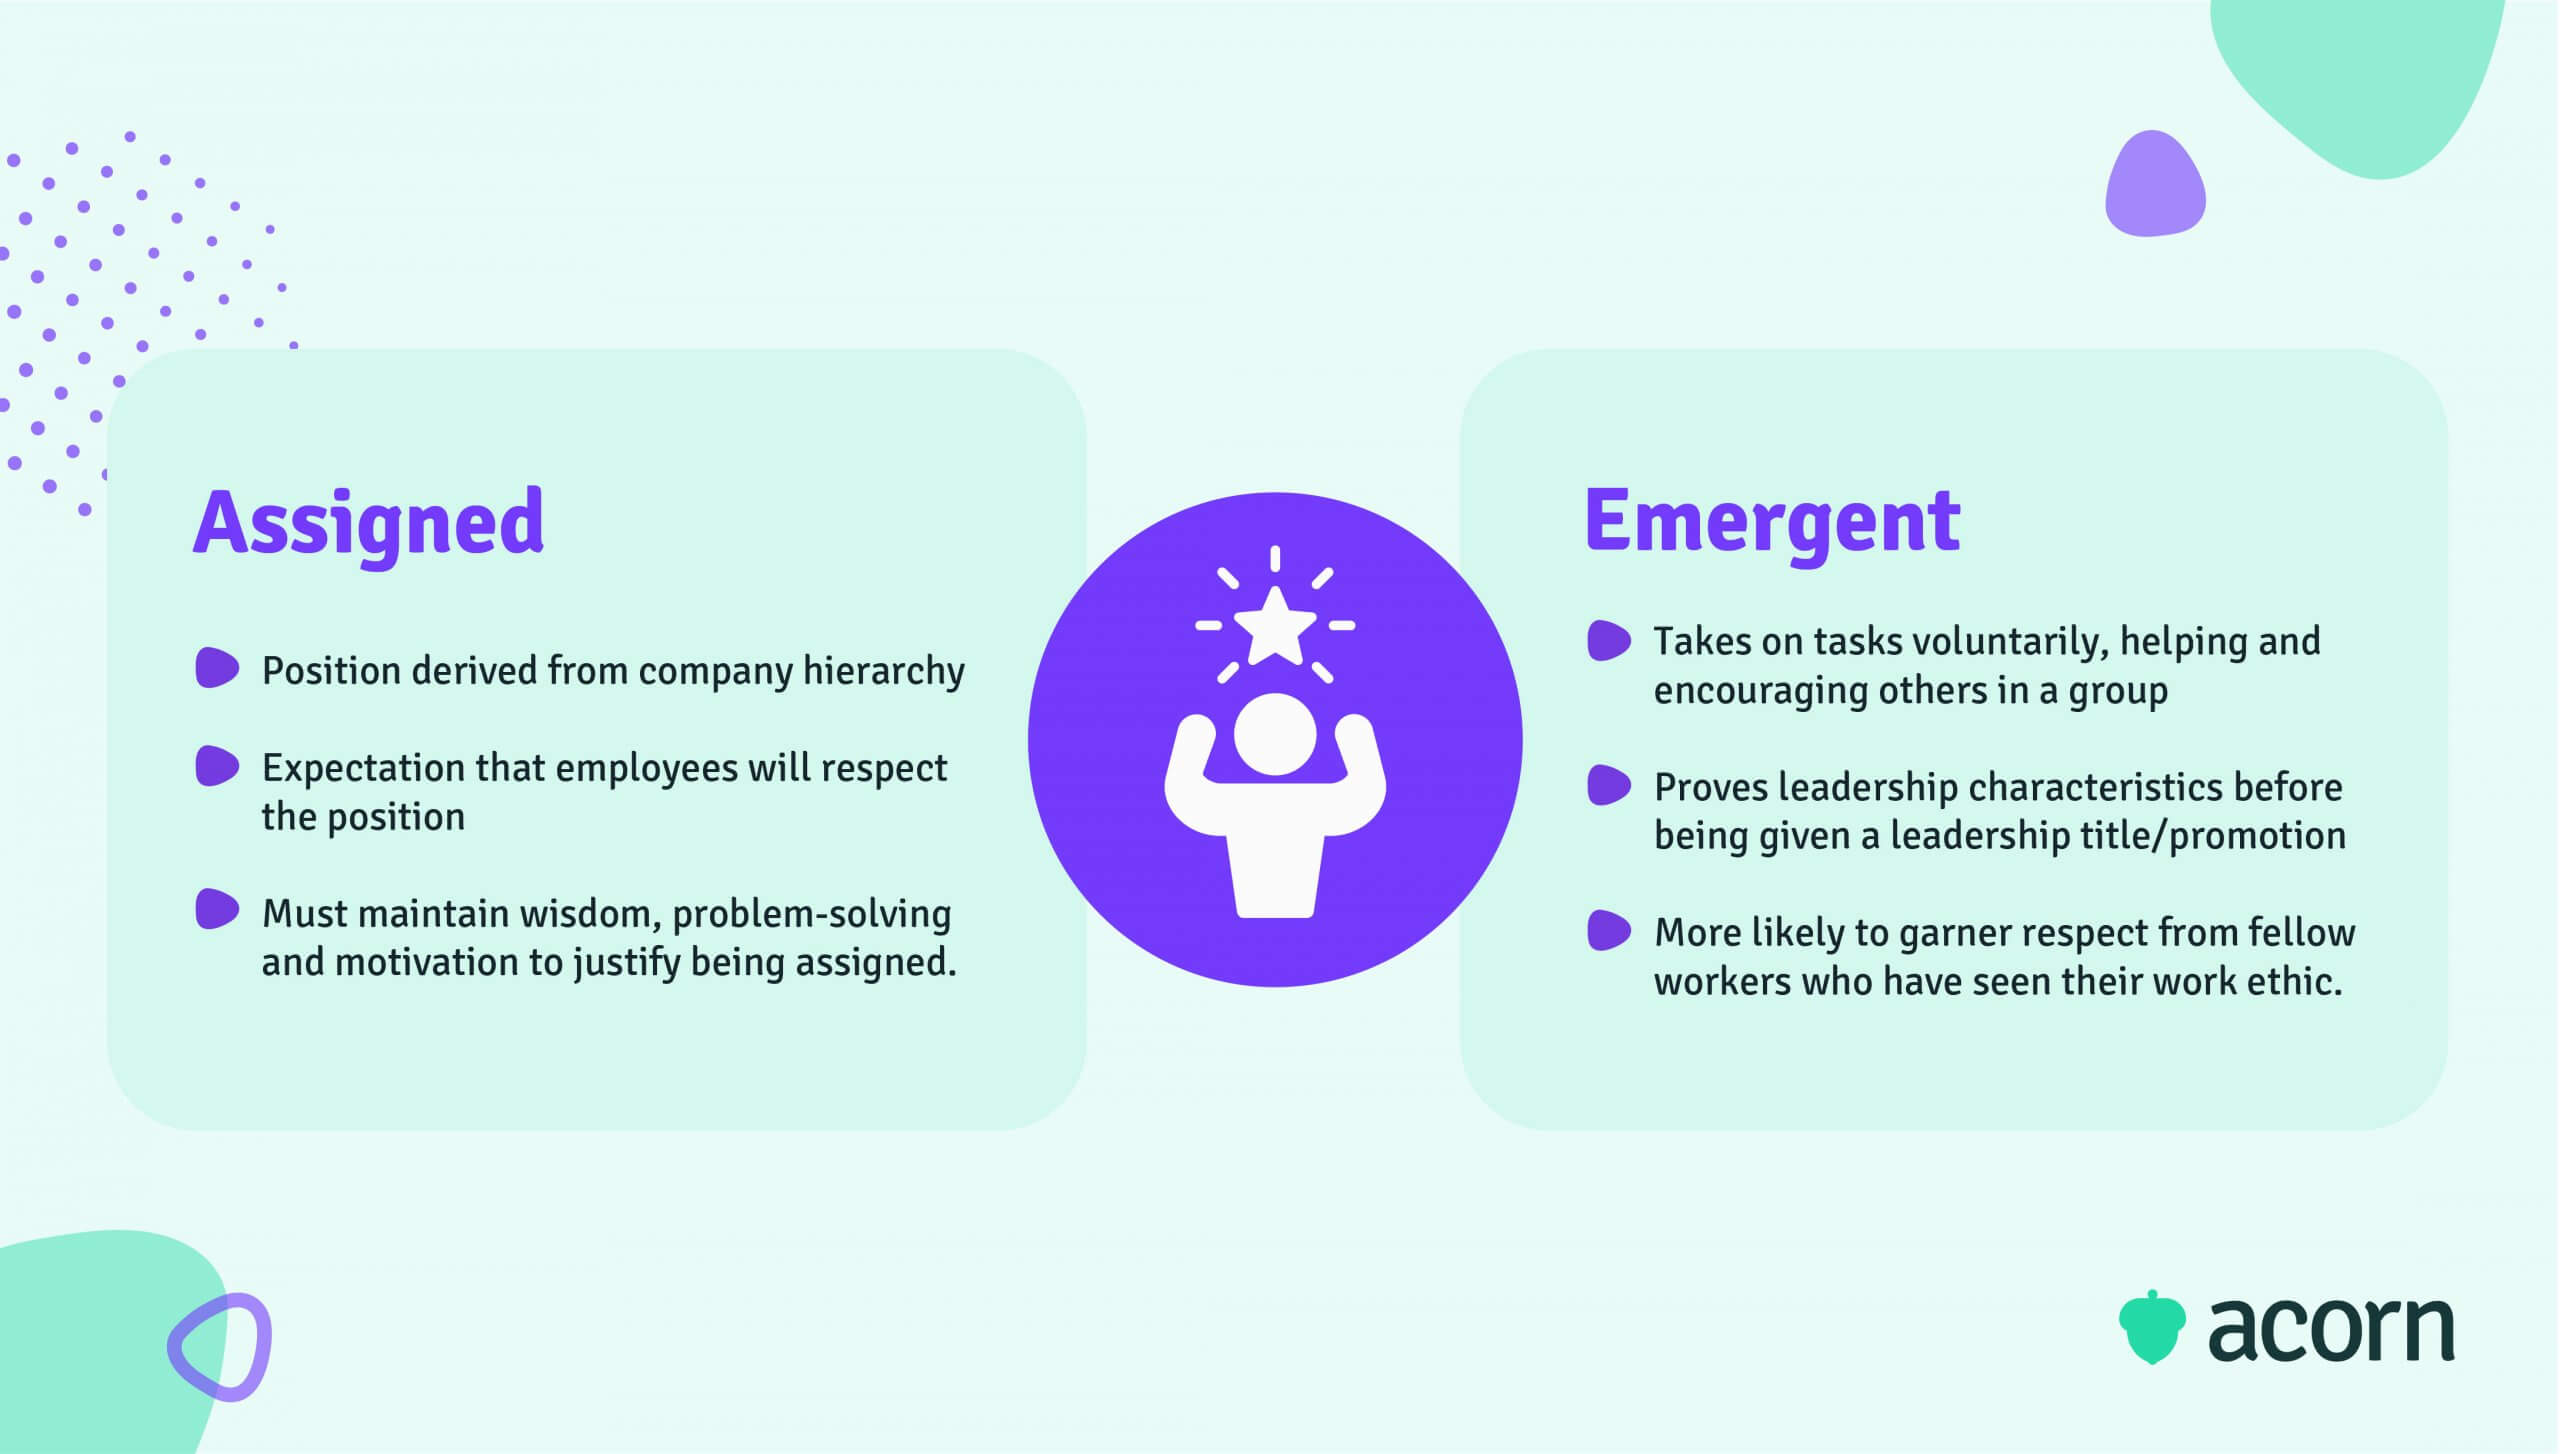 Infographic comparing assigned vs emergent leadership